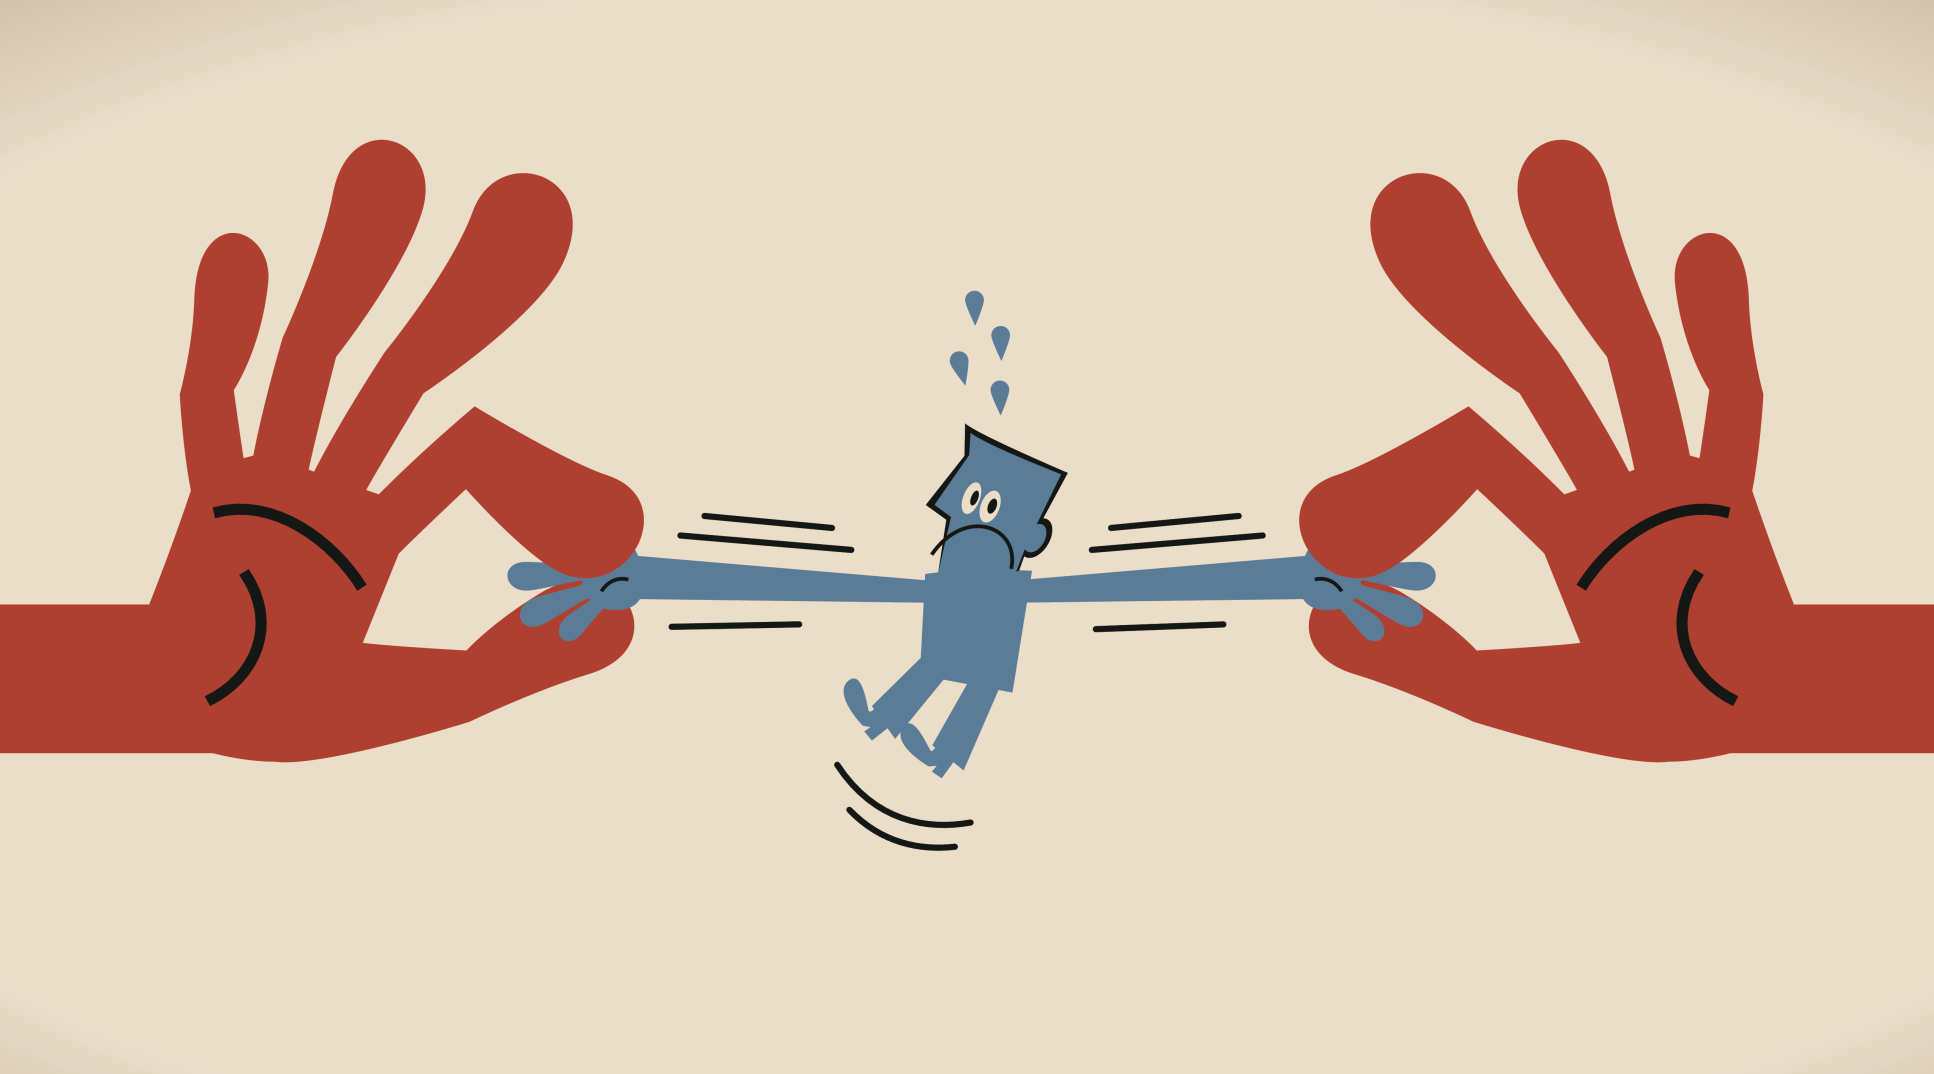 A cartoon illustration of a person being pulled in opposite directions by big hands